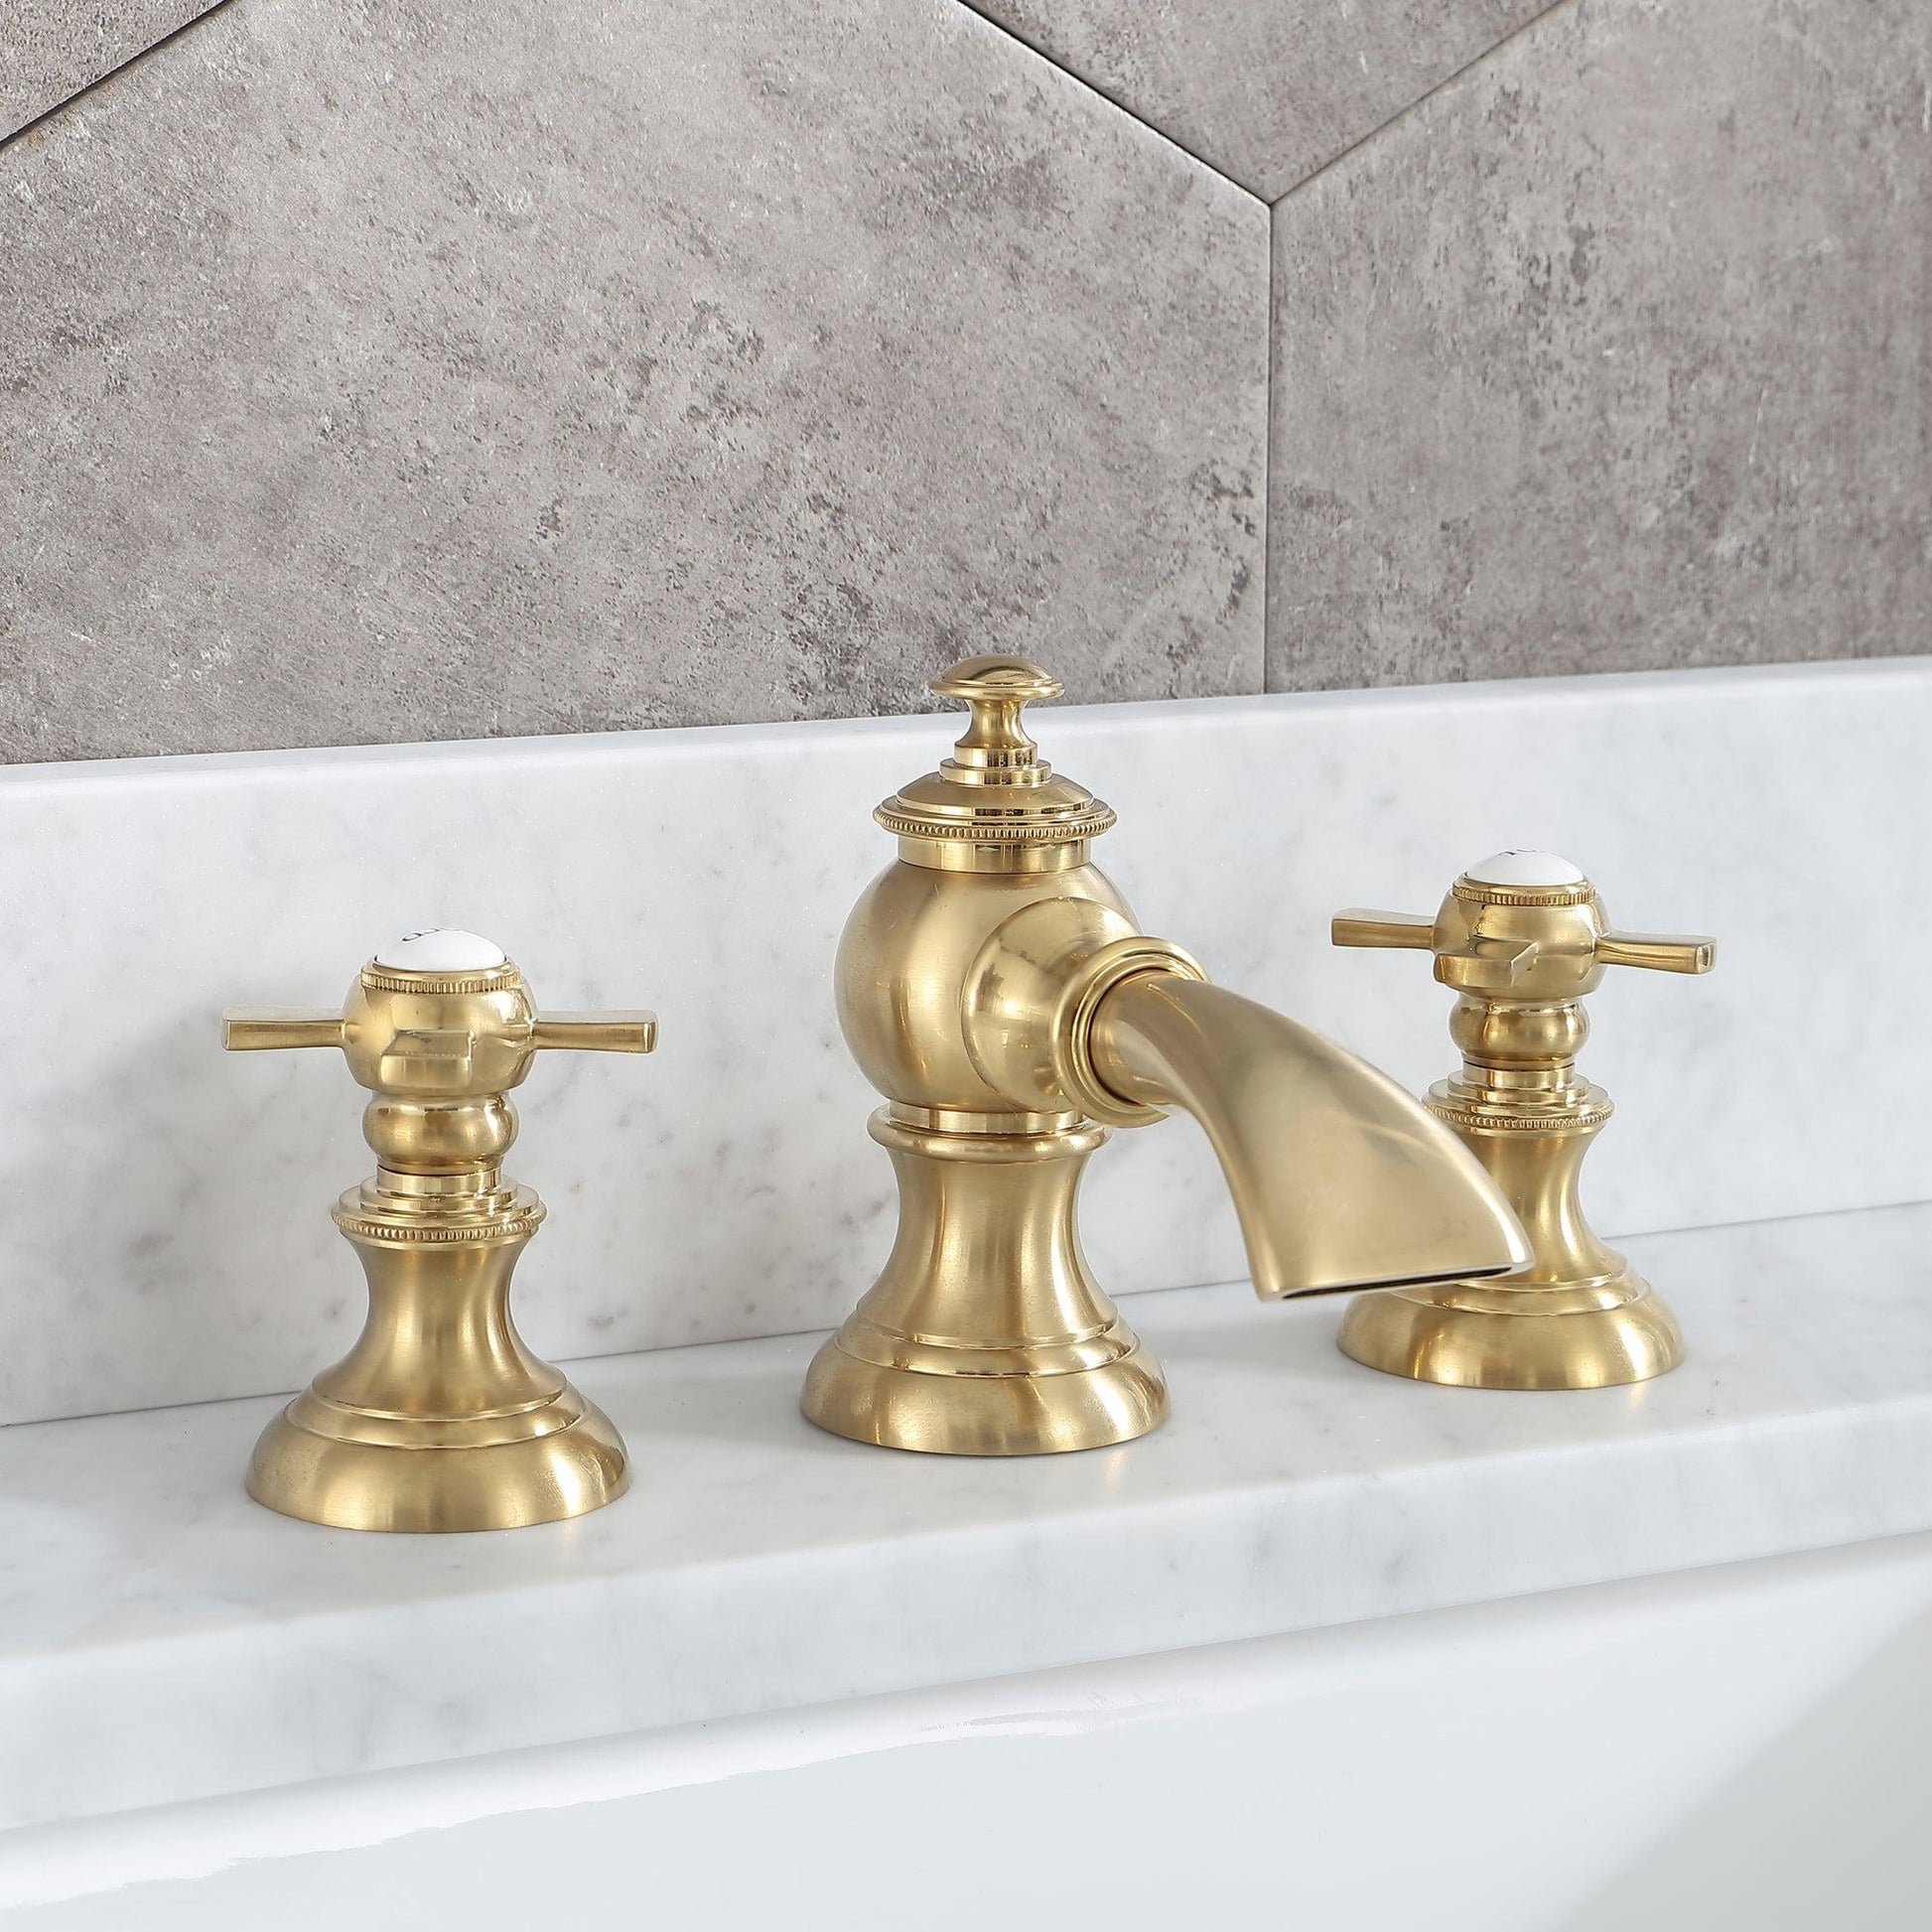 Water Creation Modern Classic Widespread Lavatory F2-0013 8" Ivory Solid Brass Faucet With Pop-Up Drain